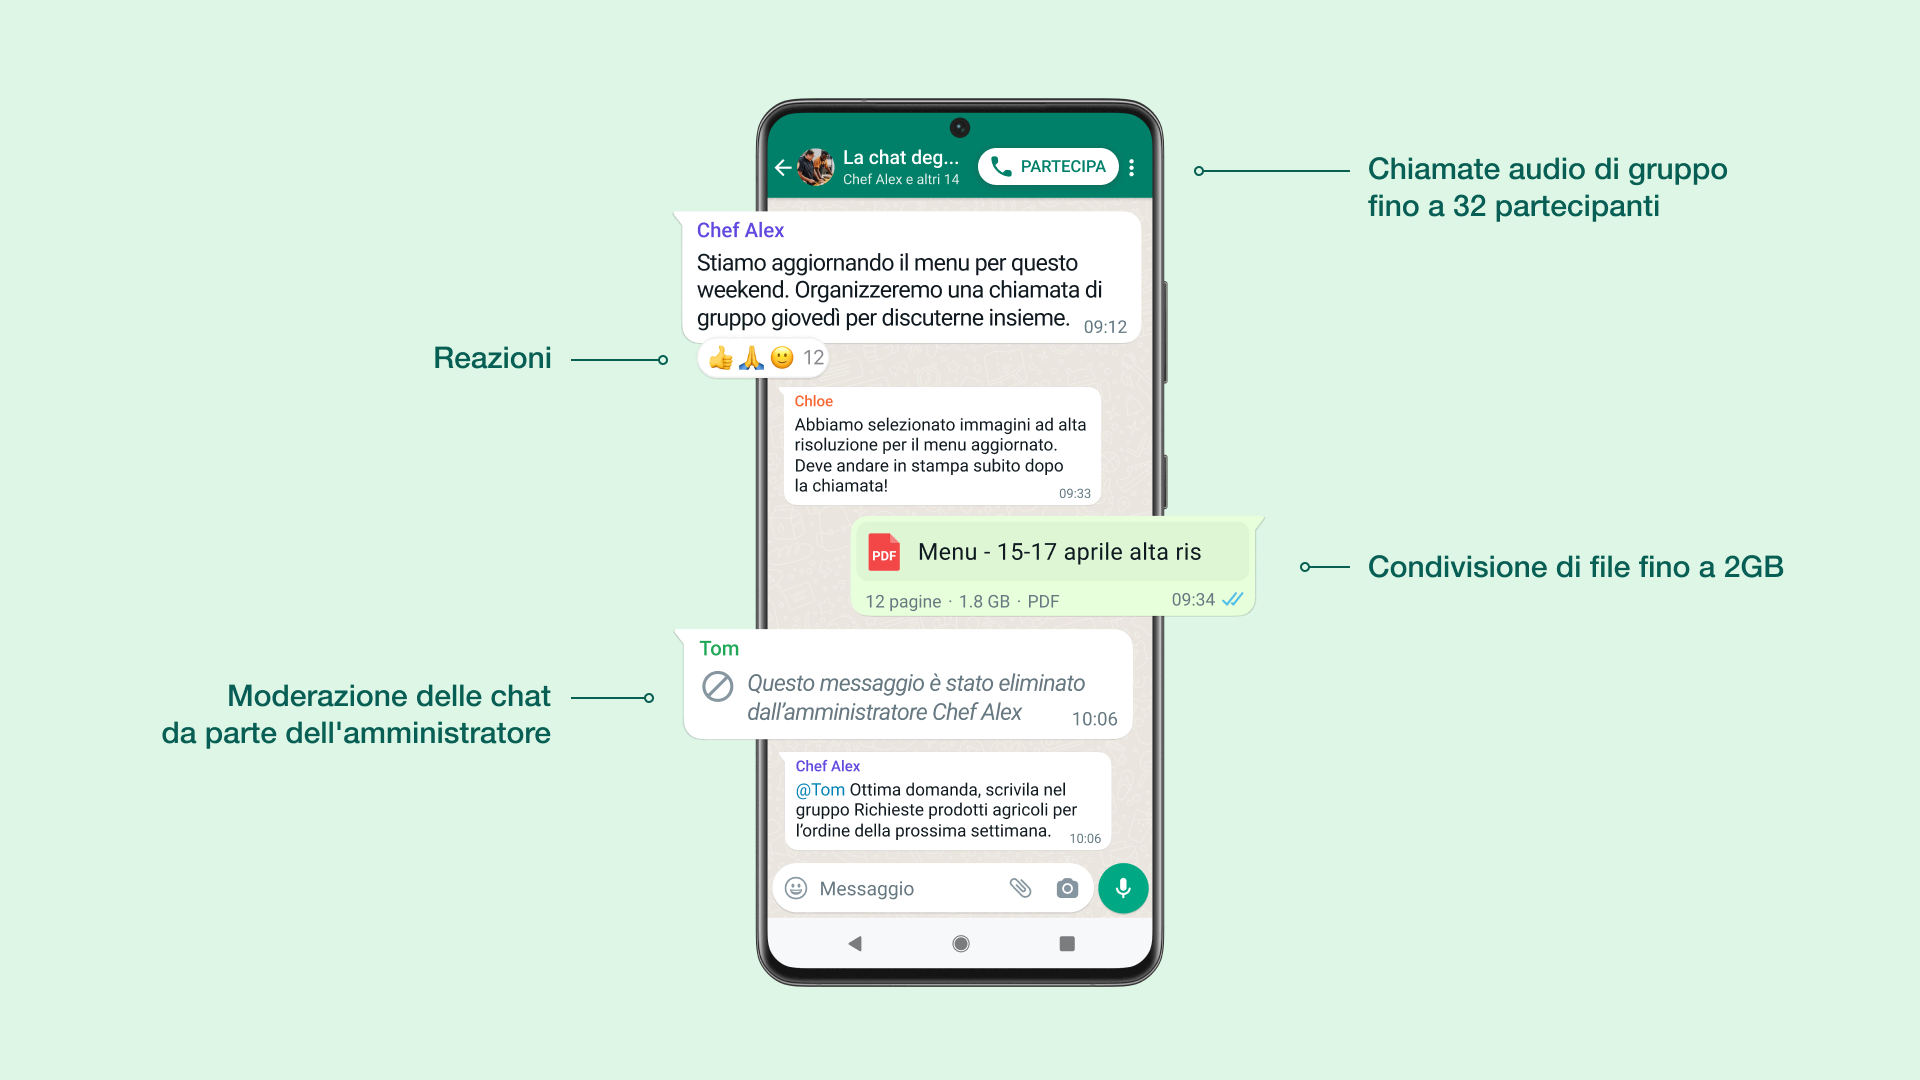 The reactions and other news for groups on WhatsApp